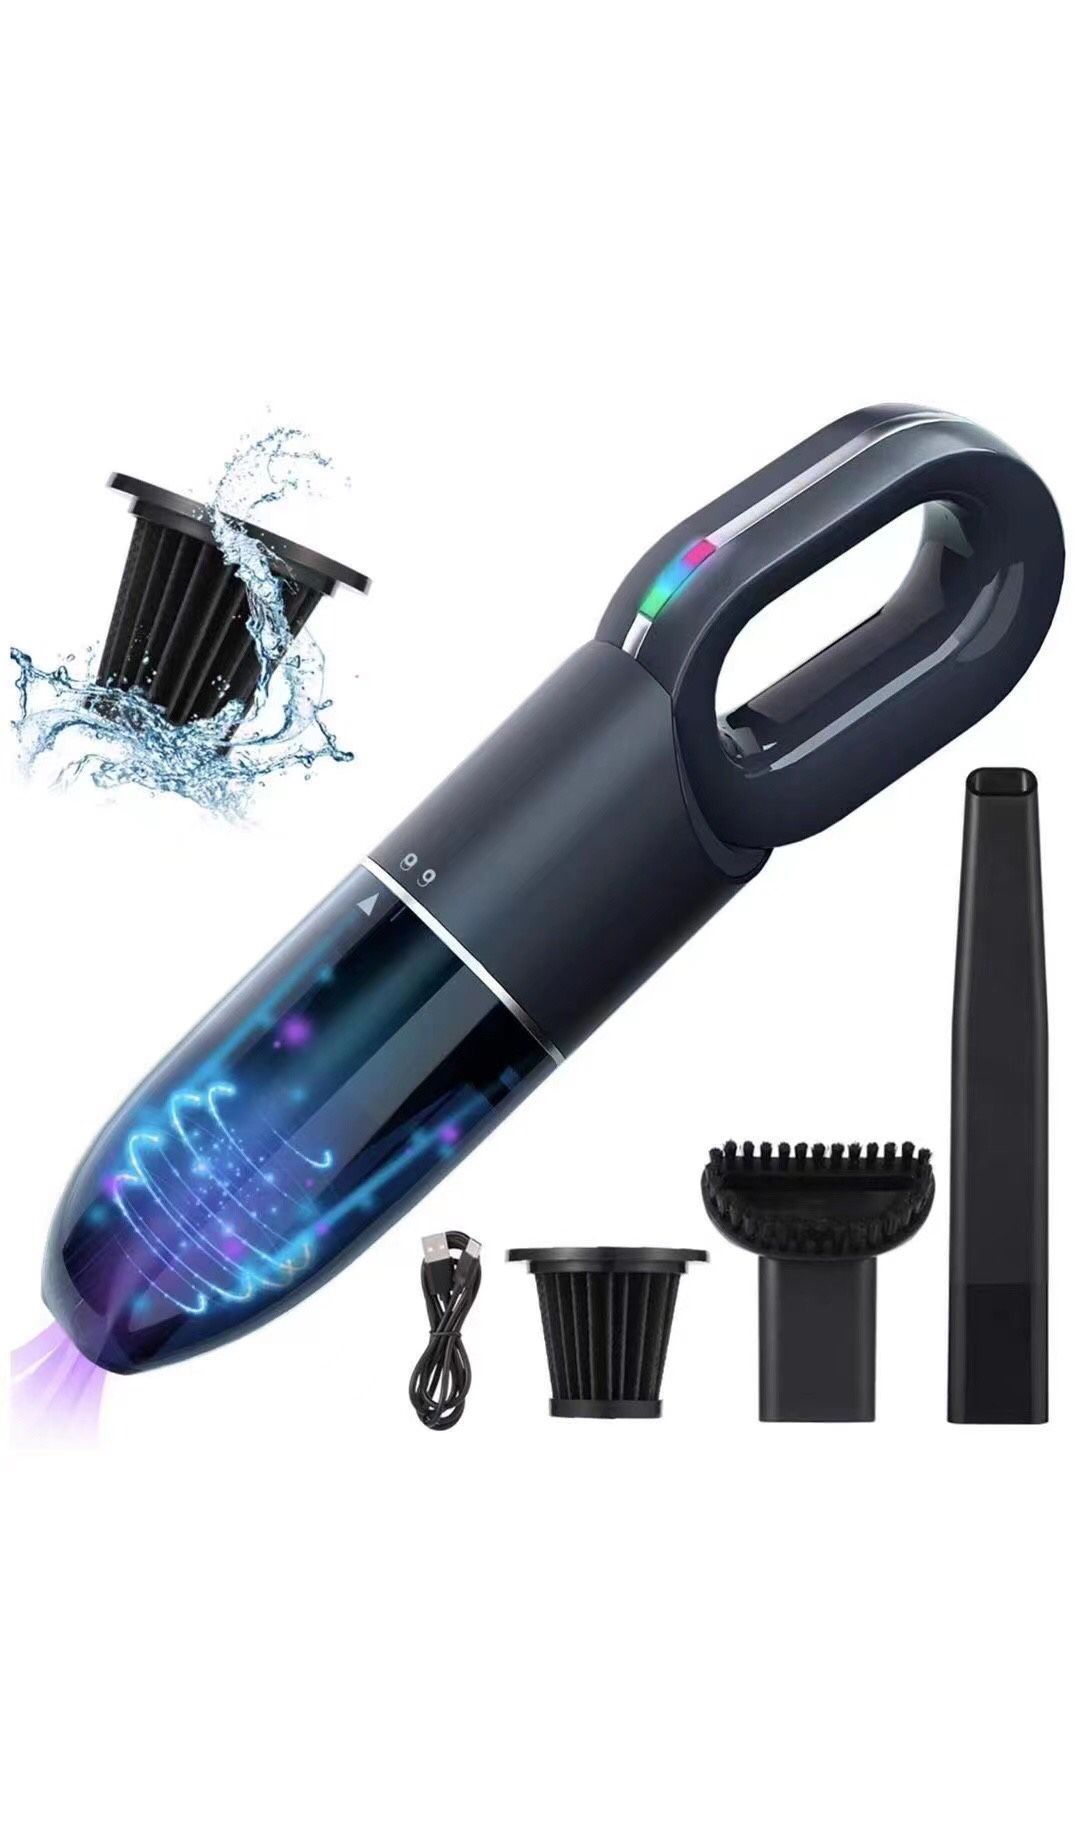 Handheld Vacuum,Car Vacuum,Rechargeable Cordless Stick Vacuum Cleaner,Pet Hair Vacuum, with 7000PA High Power and Quick Charge Portable Vacuum for Hom